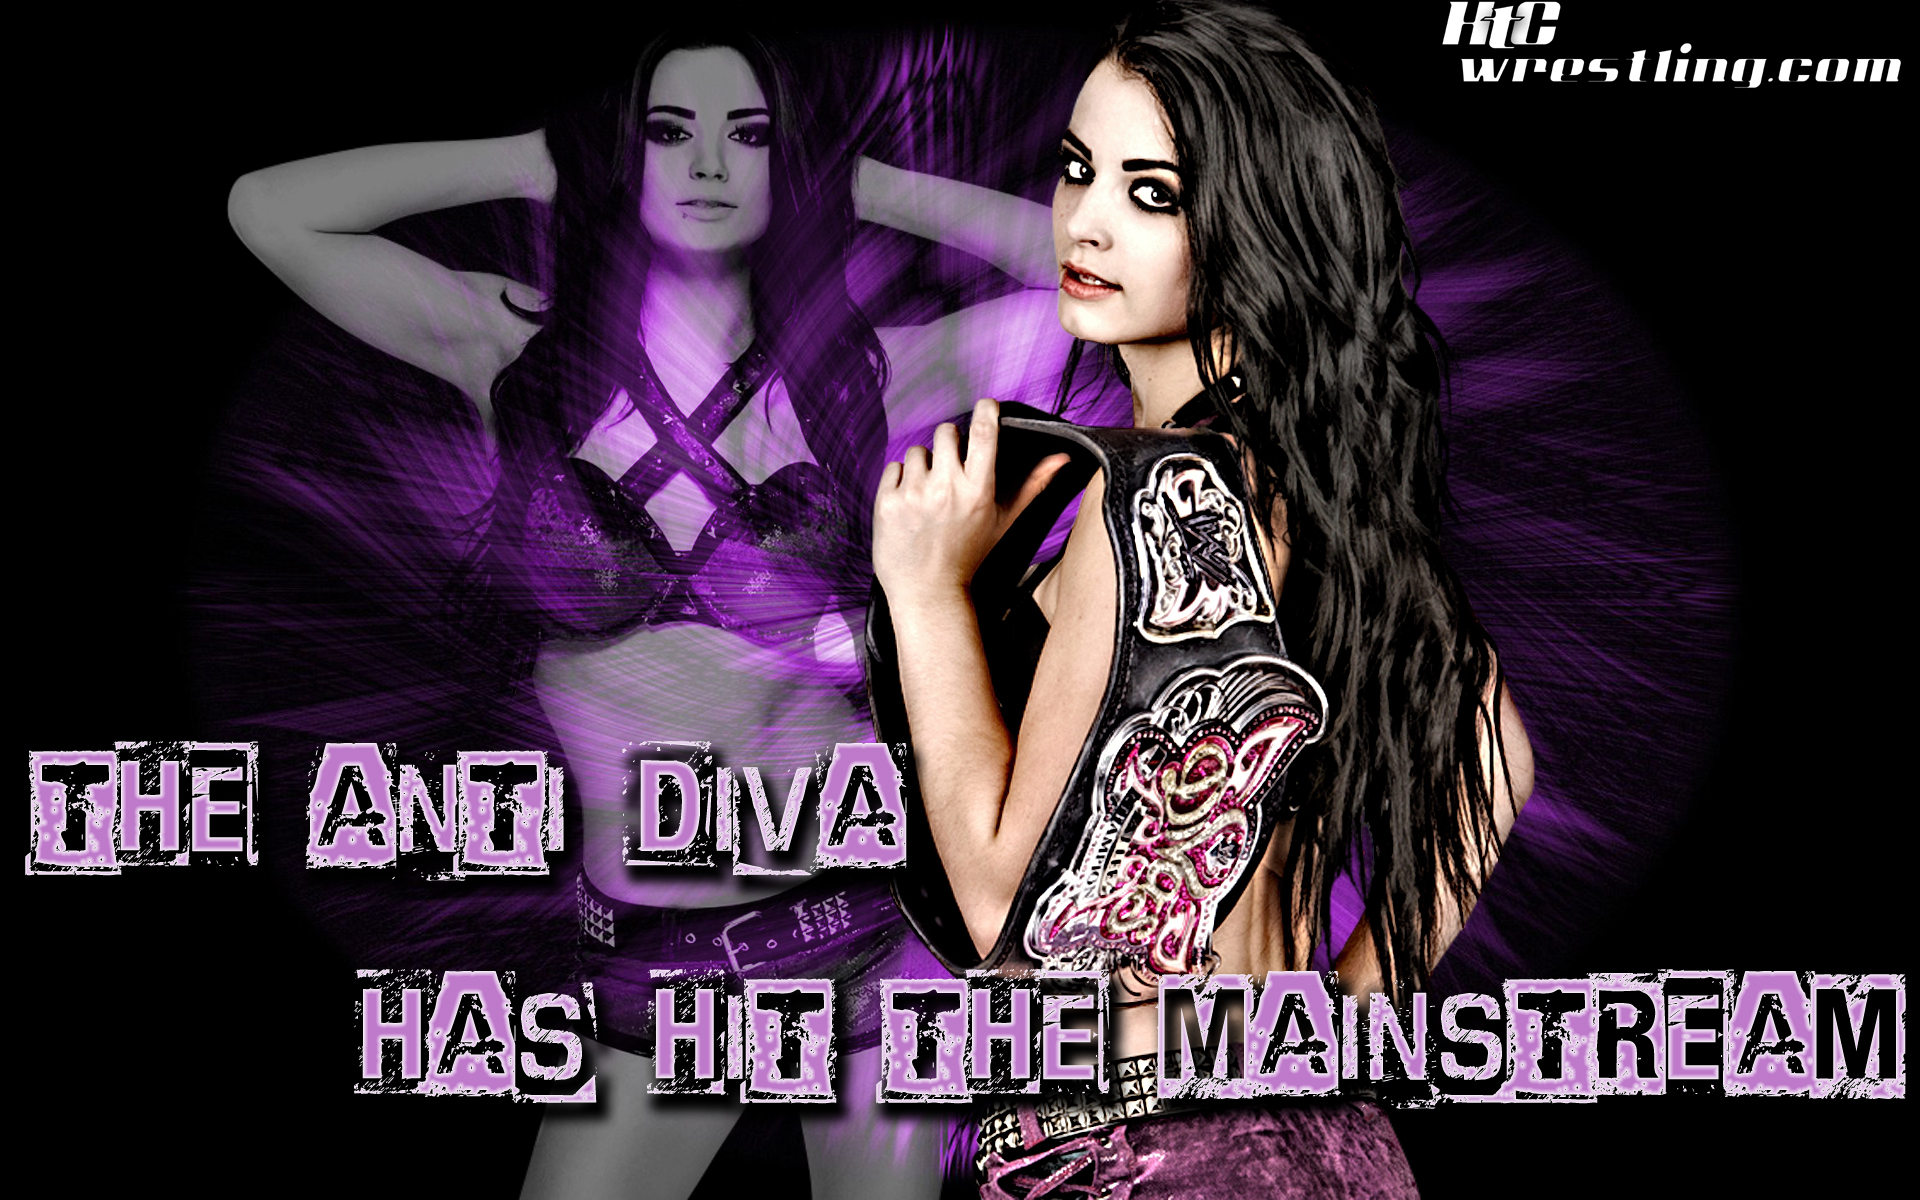 Paige Nxt Diva Champion Exclusive HD Wallpaper